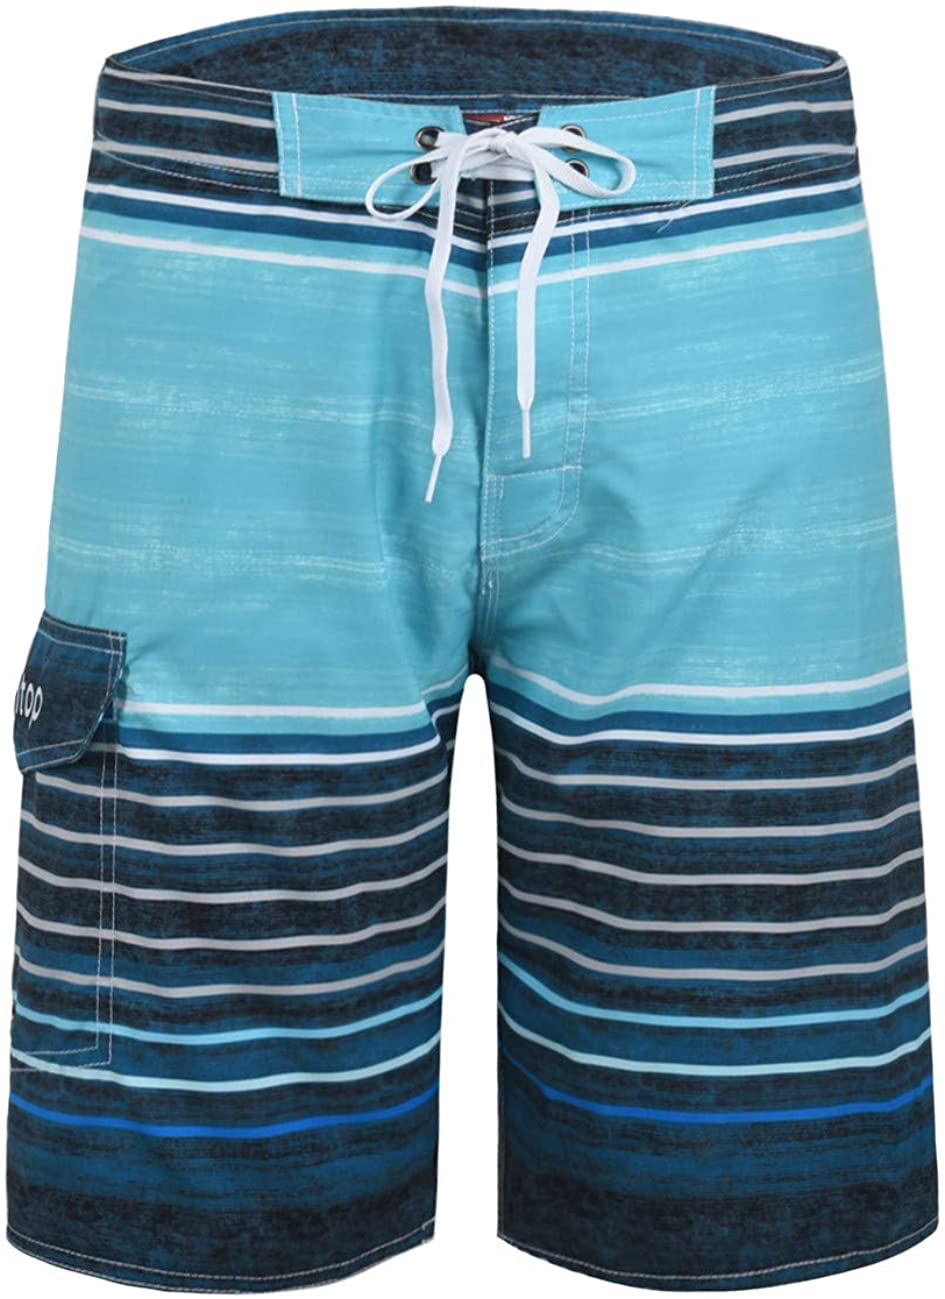 Unitop Mens Board Shorts Summer Holiday Surf Trunks Quick Dry 